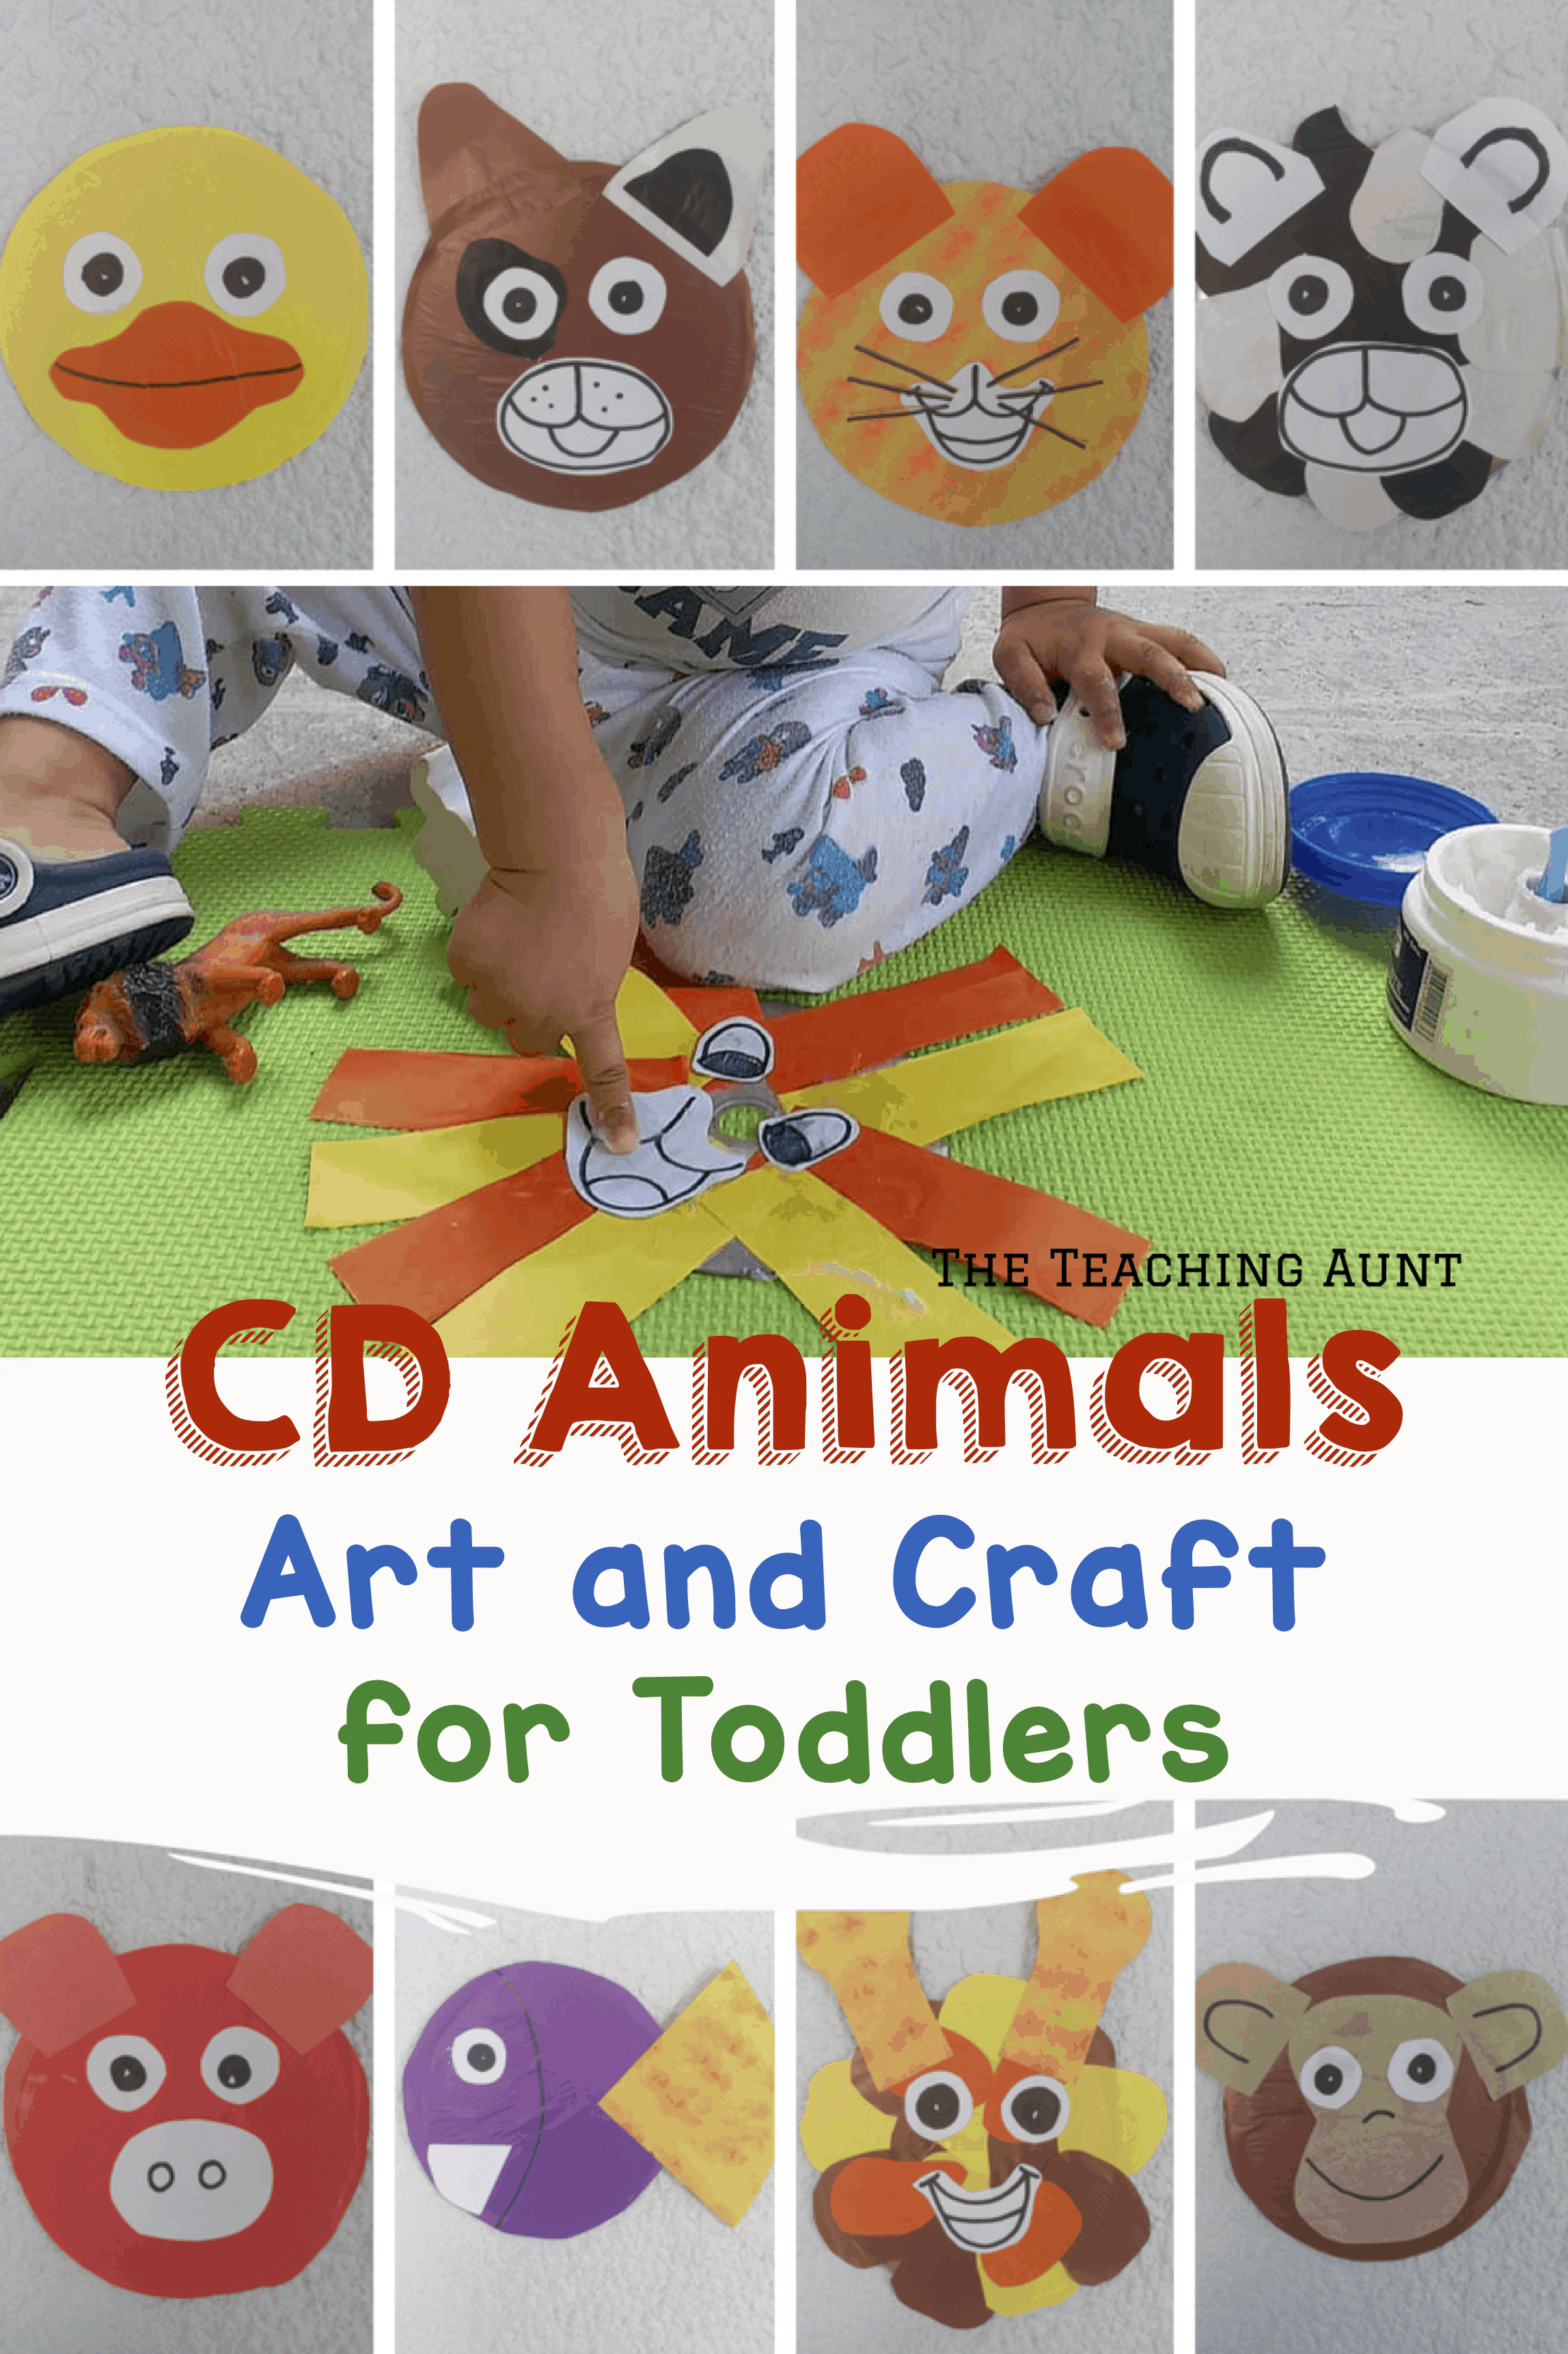 CD Animals Art and Craft for Toddlers - The Teaching Aunt